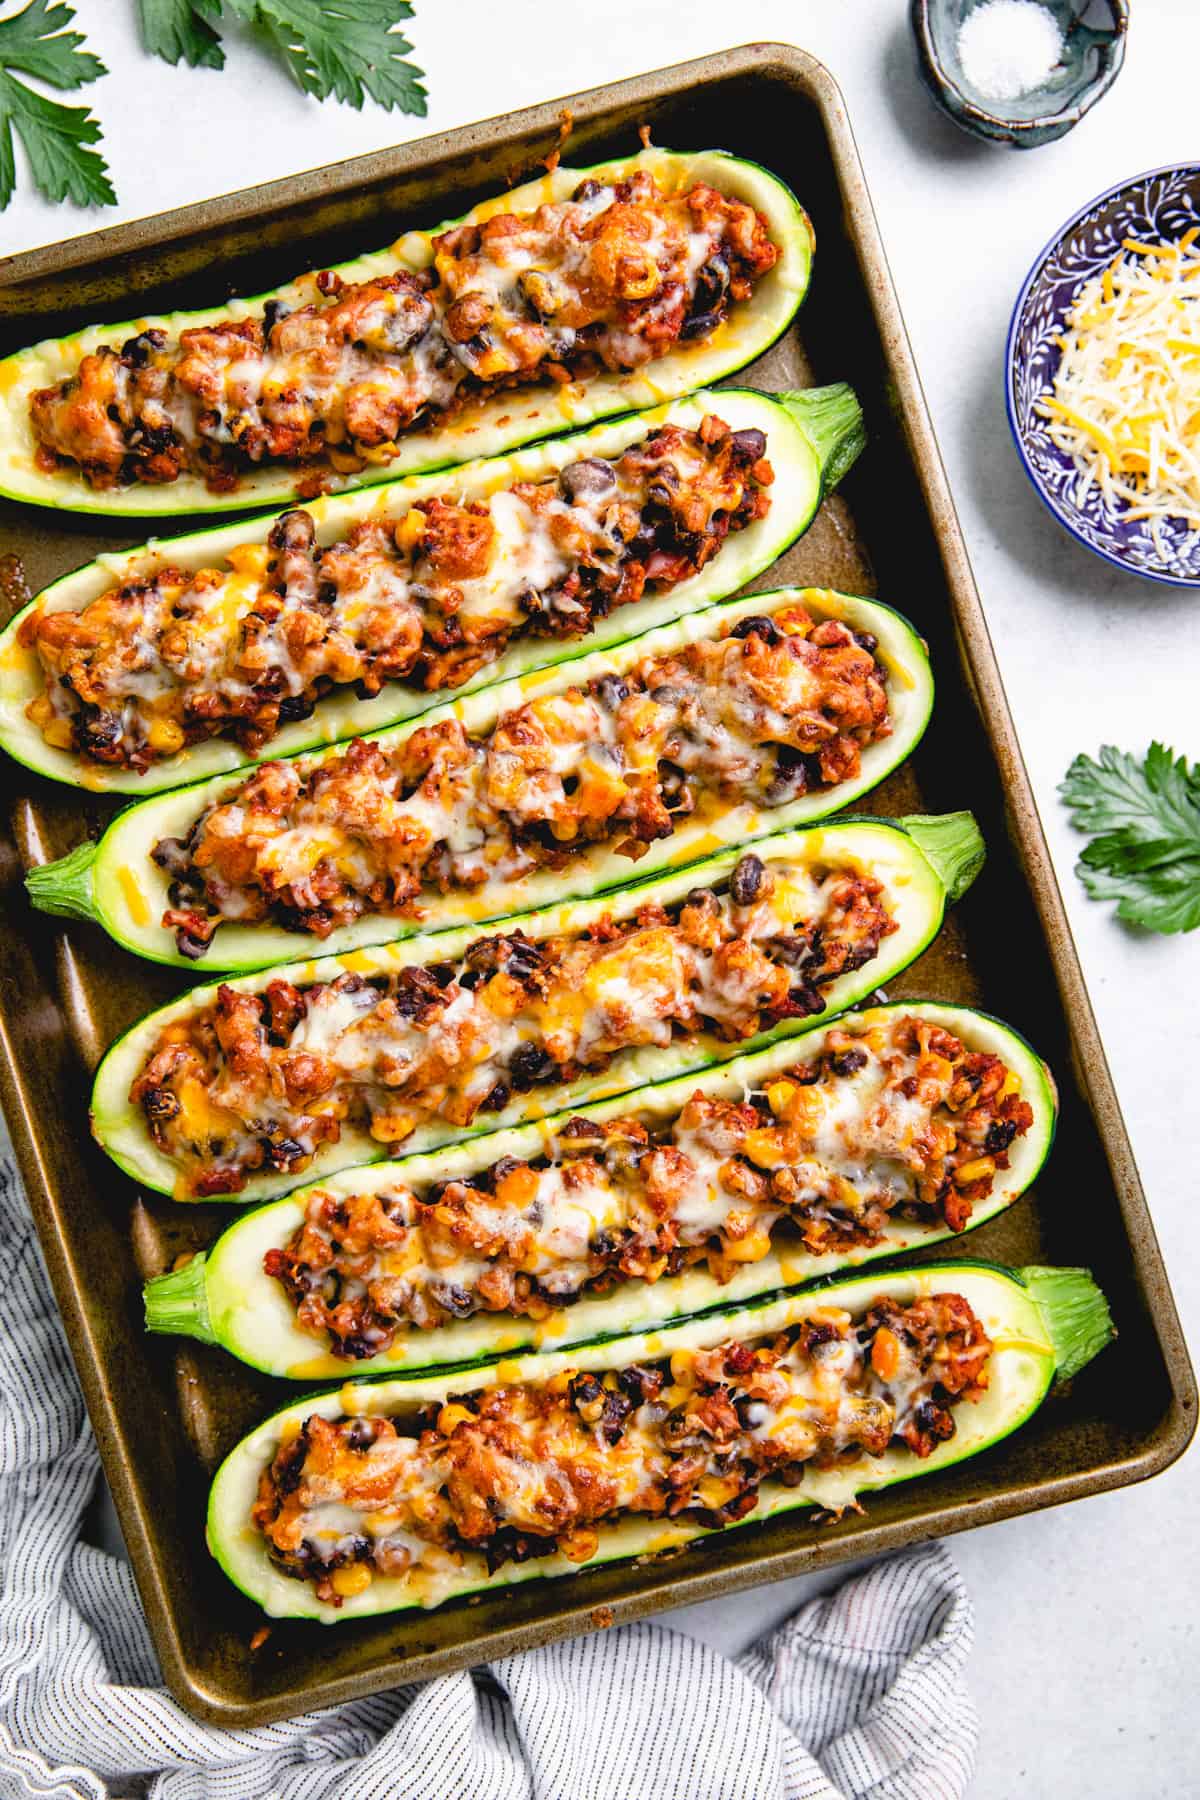 Zucchini boats, stuffed with ground turkey, black beans, and corn, topped with melted cheese on a baking sheet.